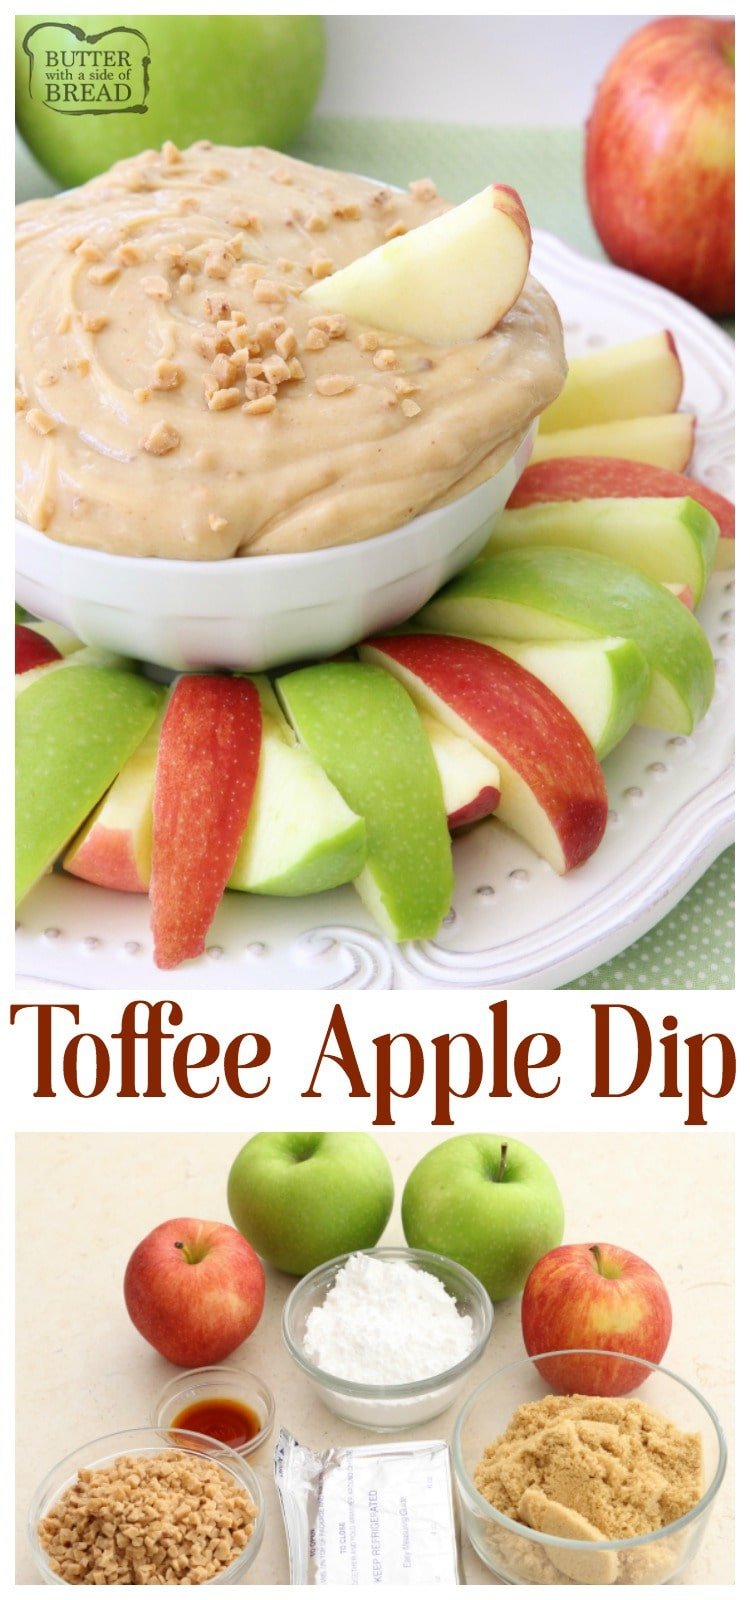 Apple Dip made with cream cheese, brown sugar and toffee bits! Perfect for any gathering or an after-school snack. Toffee Apple Dip is made in minutes and delicious.